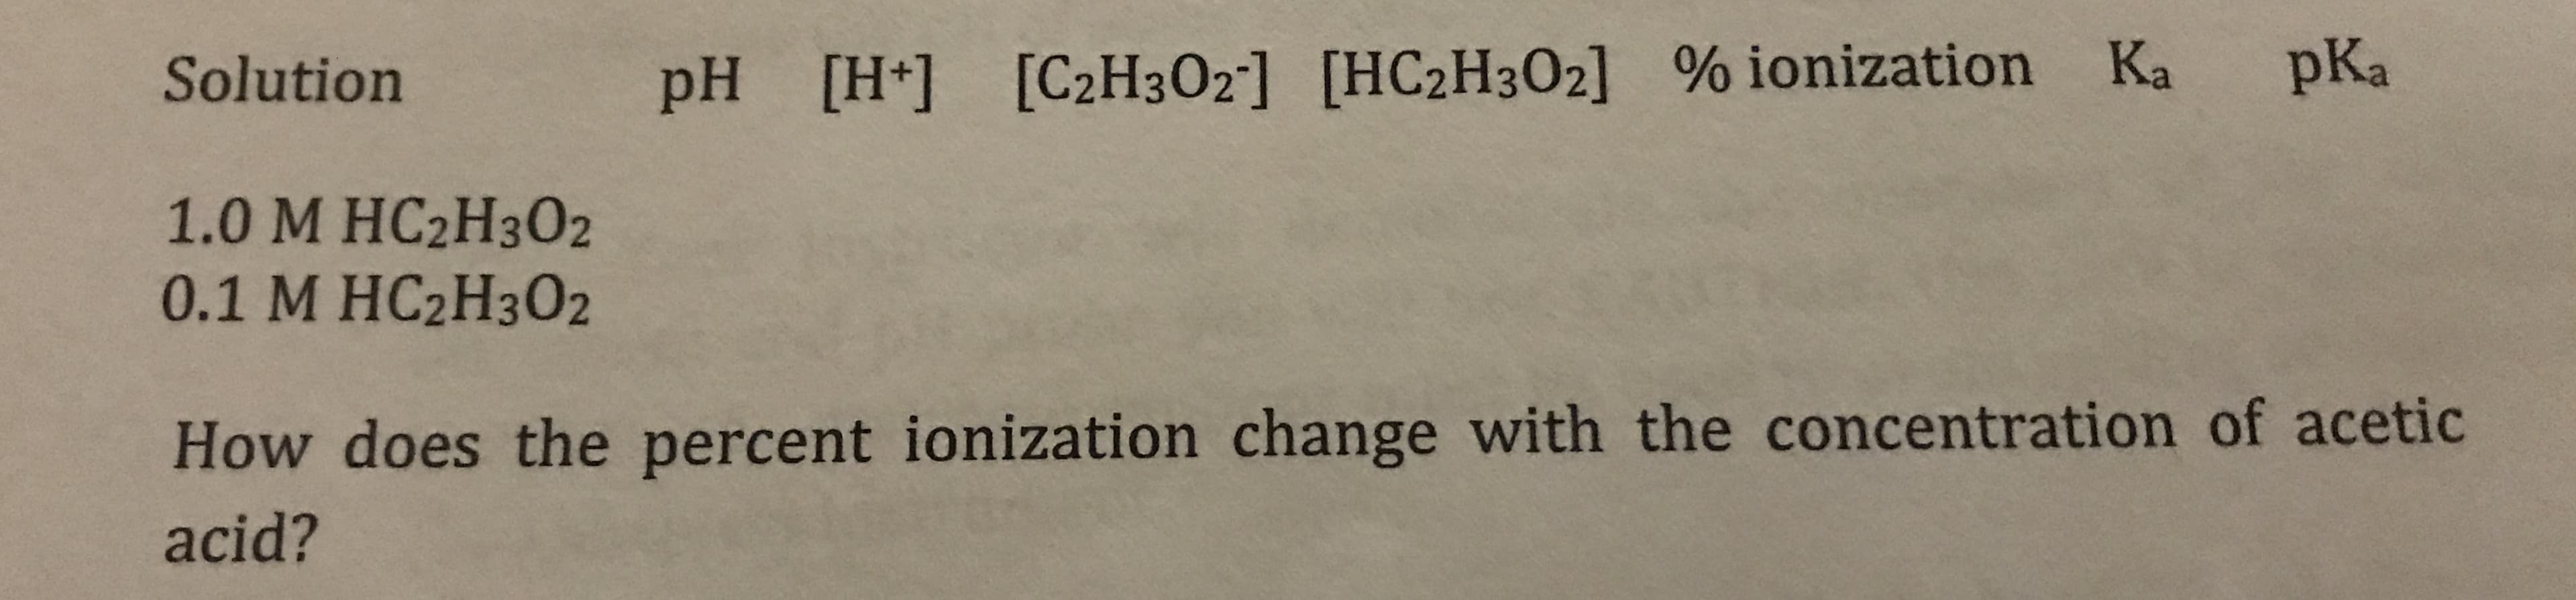 pKa
Solution
pH [H+] [C2H3O2] [HC2H3O2] % ionization Ka
1.0 М НC2Н302
0.1 M HC2H302
How does the percent ionization change with the concentration of acetic
acid?
